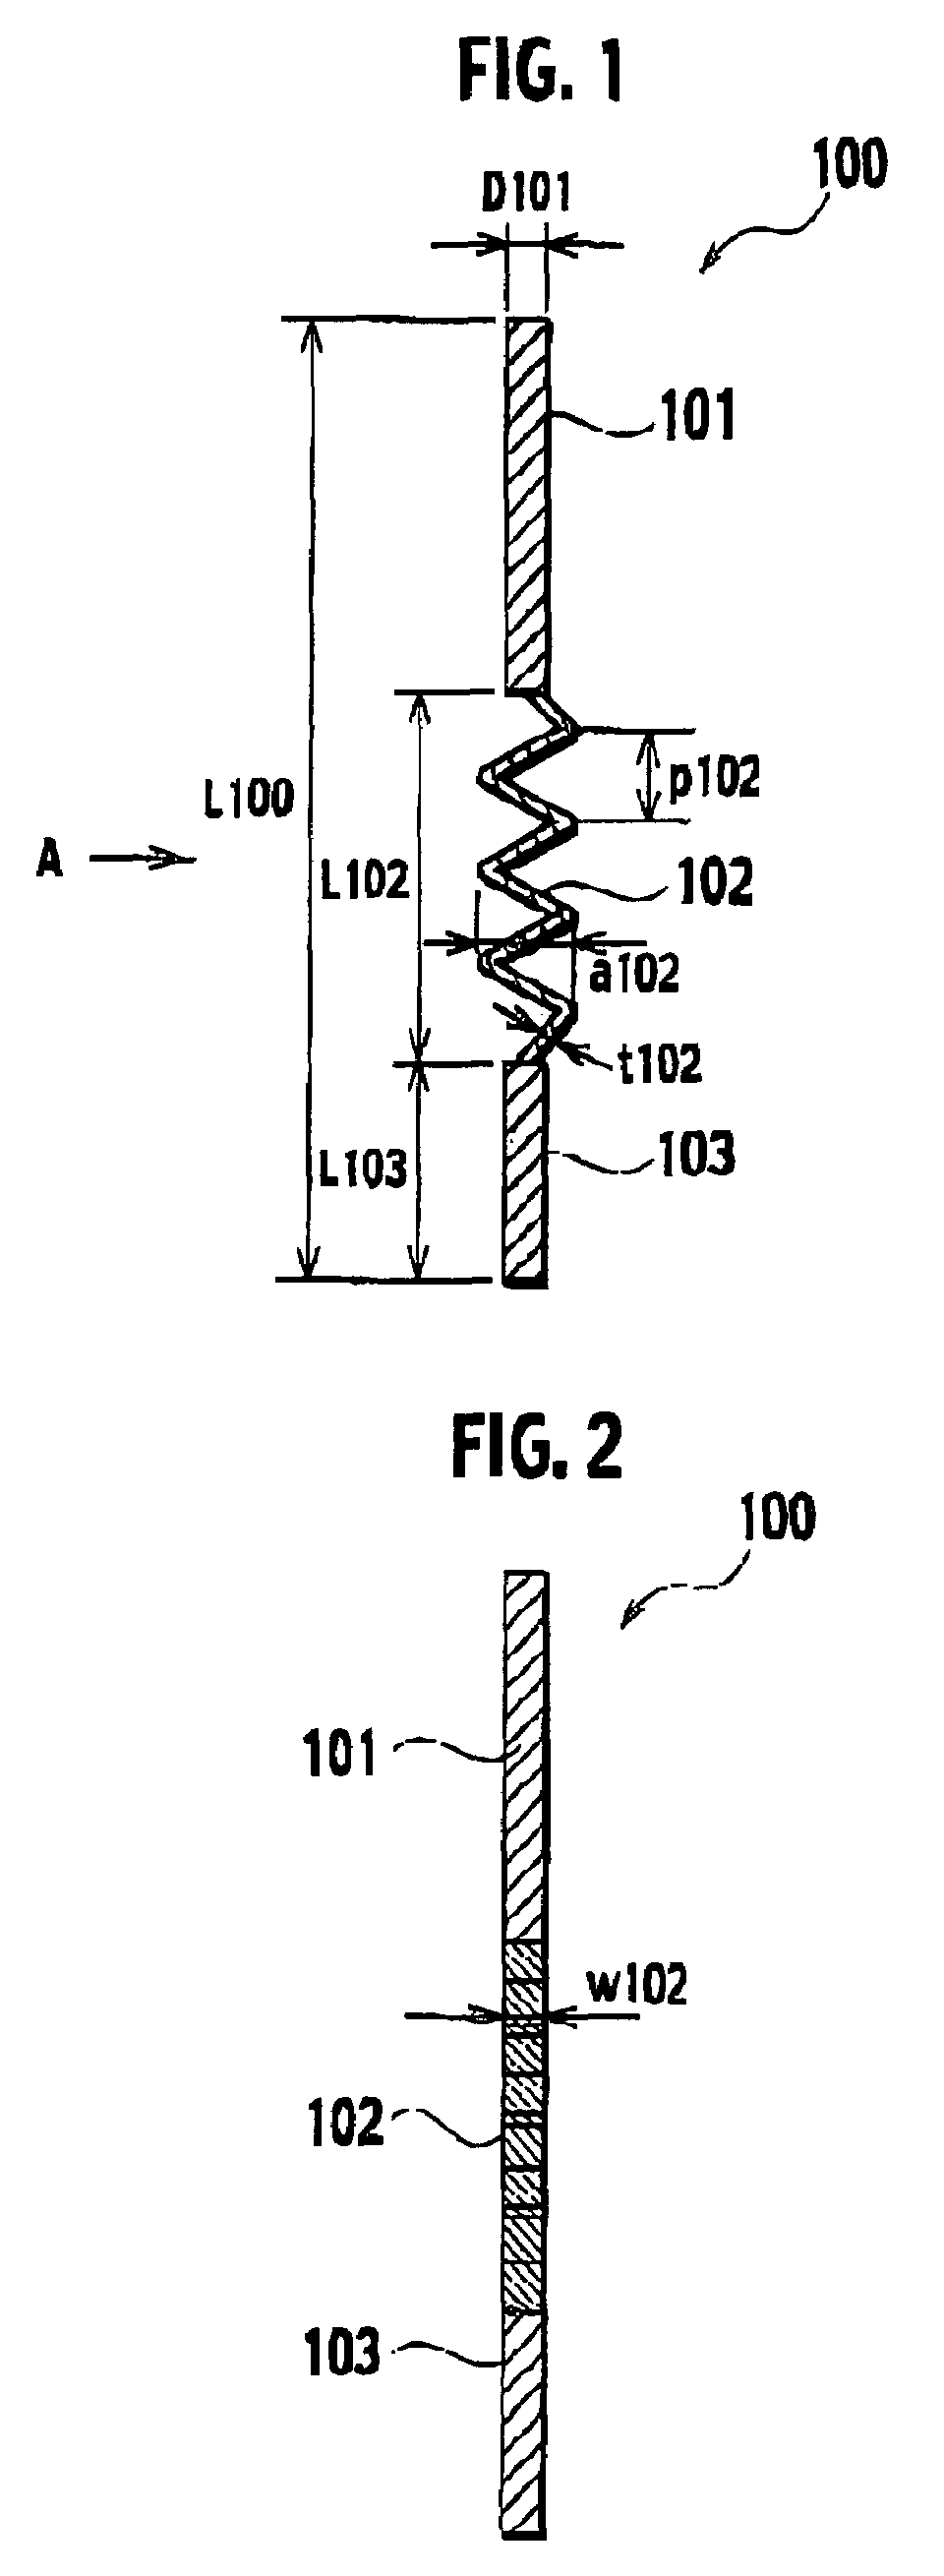 Power-supplying member and heating apparatus using the same